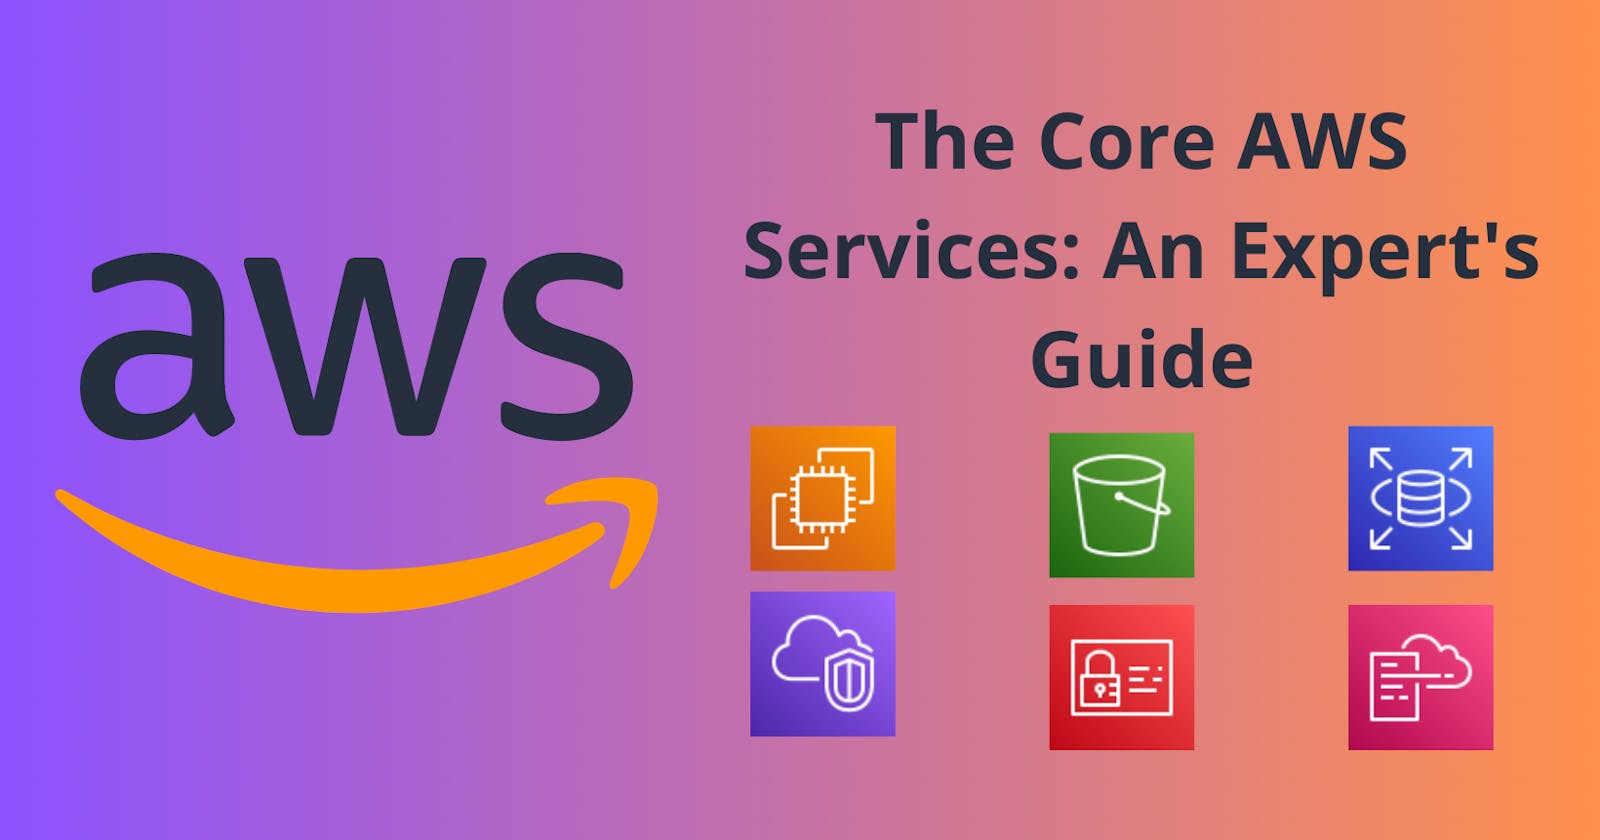 The Core AWS Services: An Expert's Guide